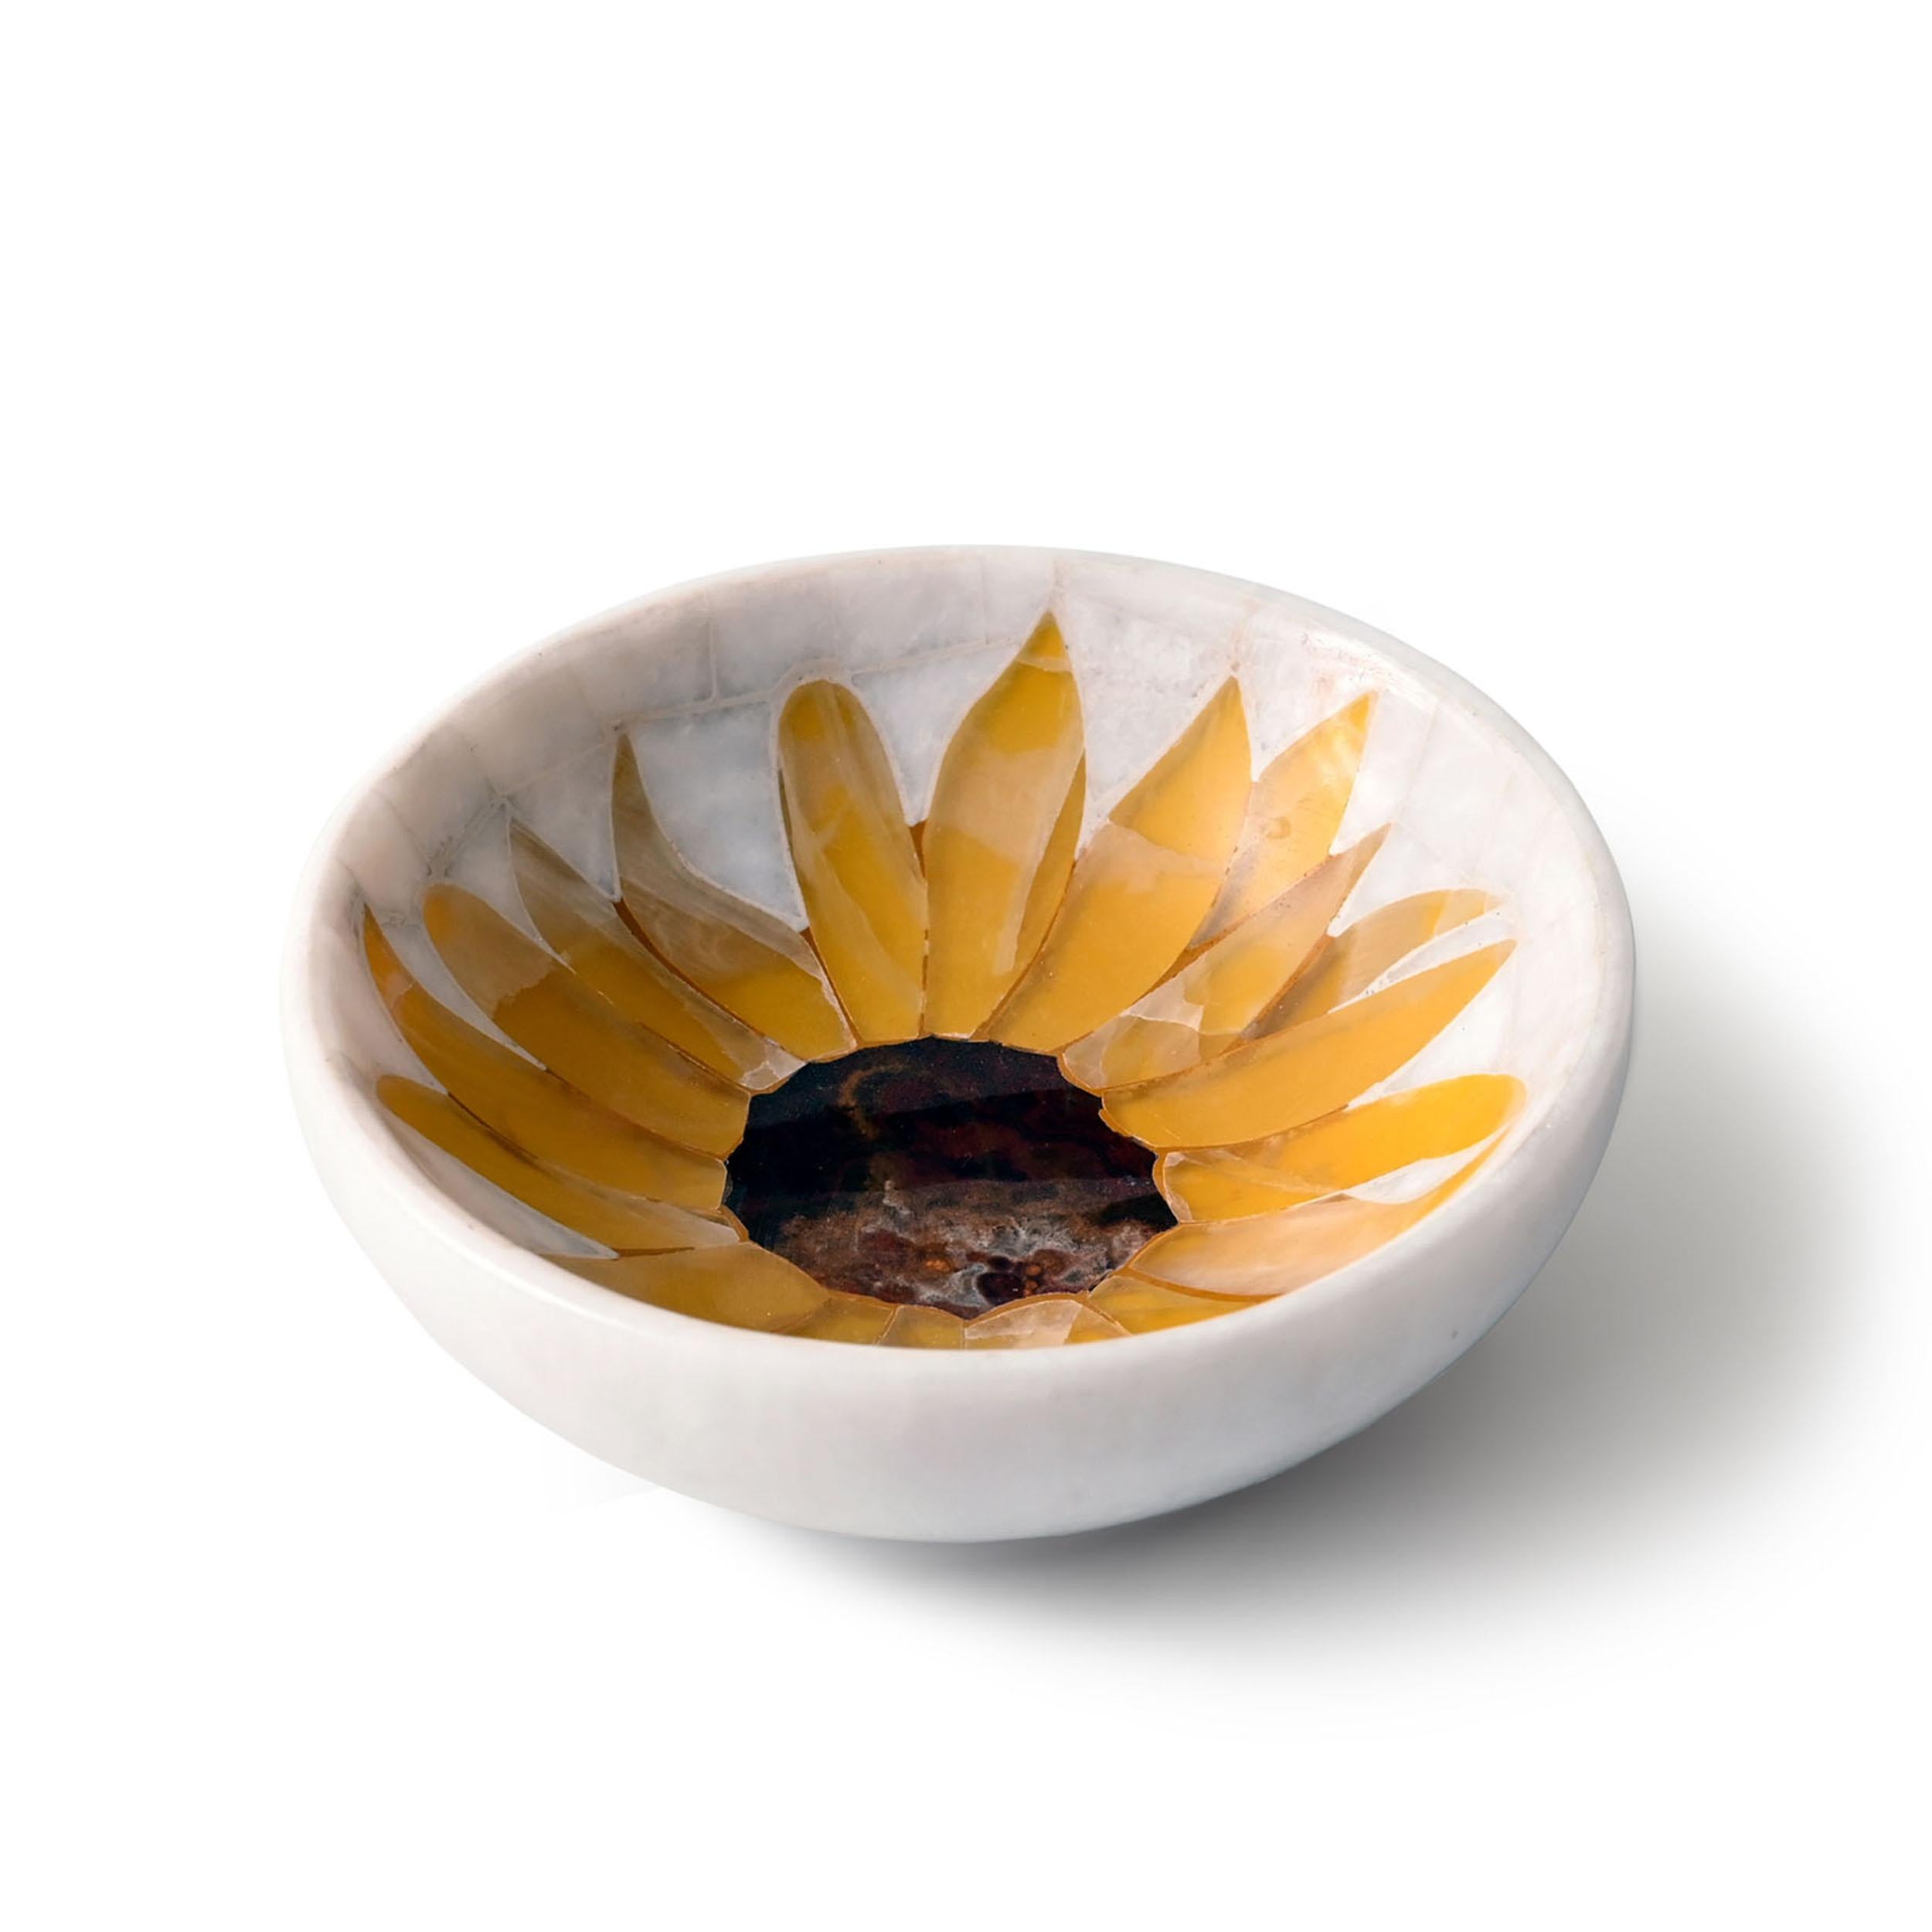 Arles bowl II by Studio Lel
Dimensions: D 30.5 x H 7.6 cm 
Materials: Onyx, marble.
Also available in different dimension.

These are handmade from semiprecious stone and marble in a small artisanal workshop. Please note that variations and